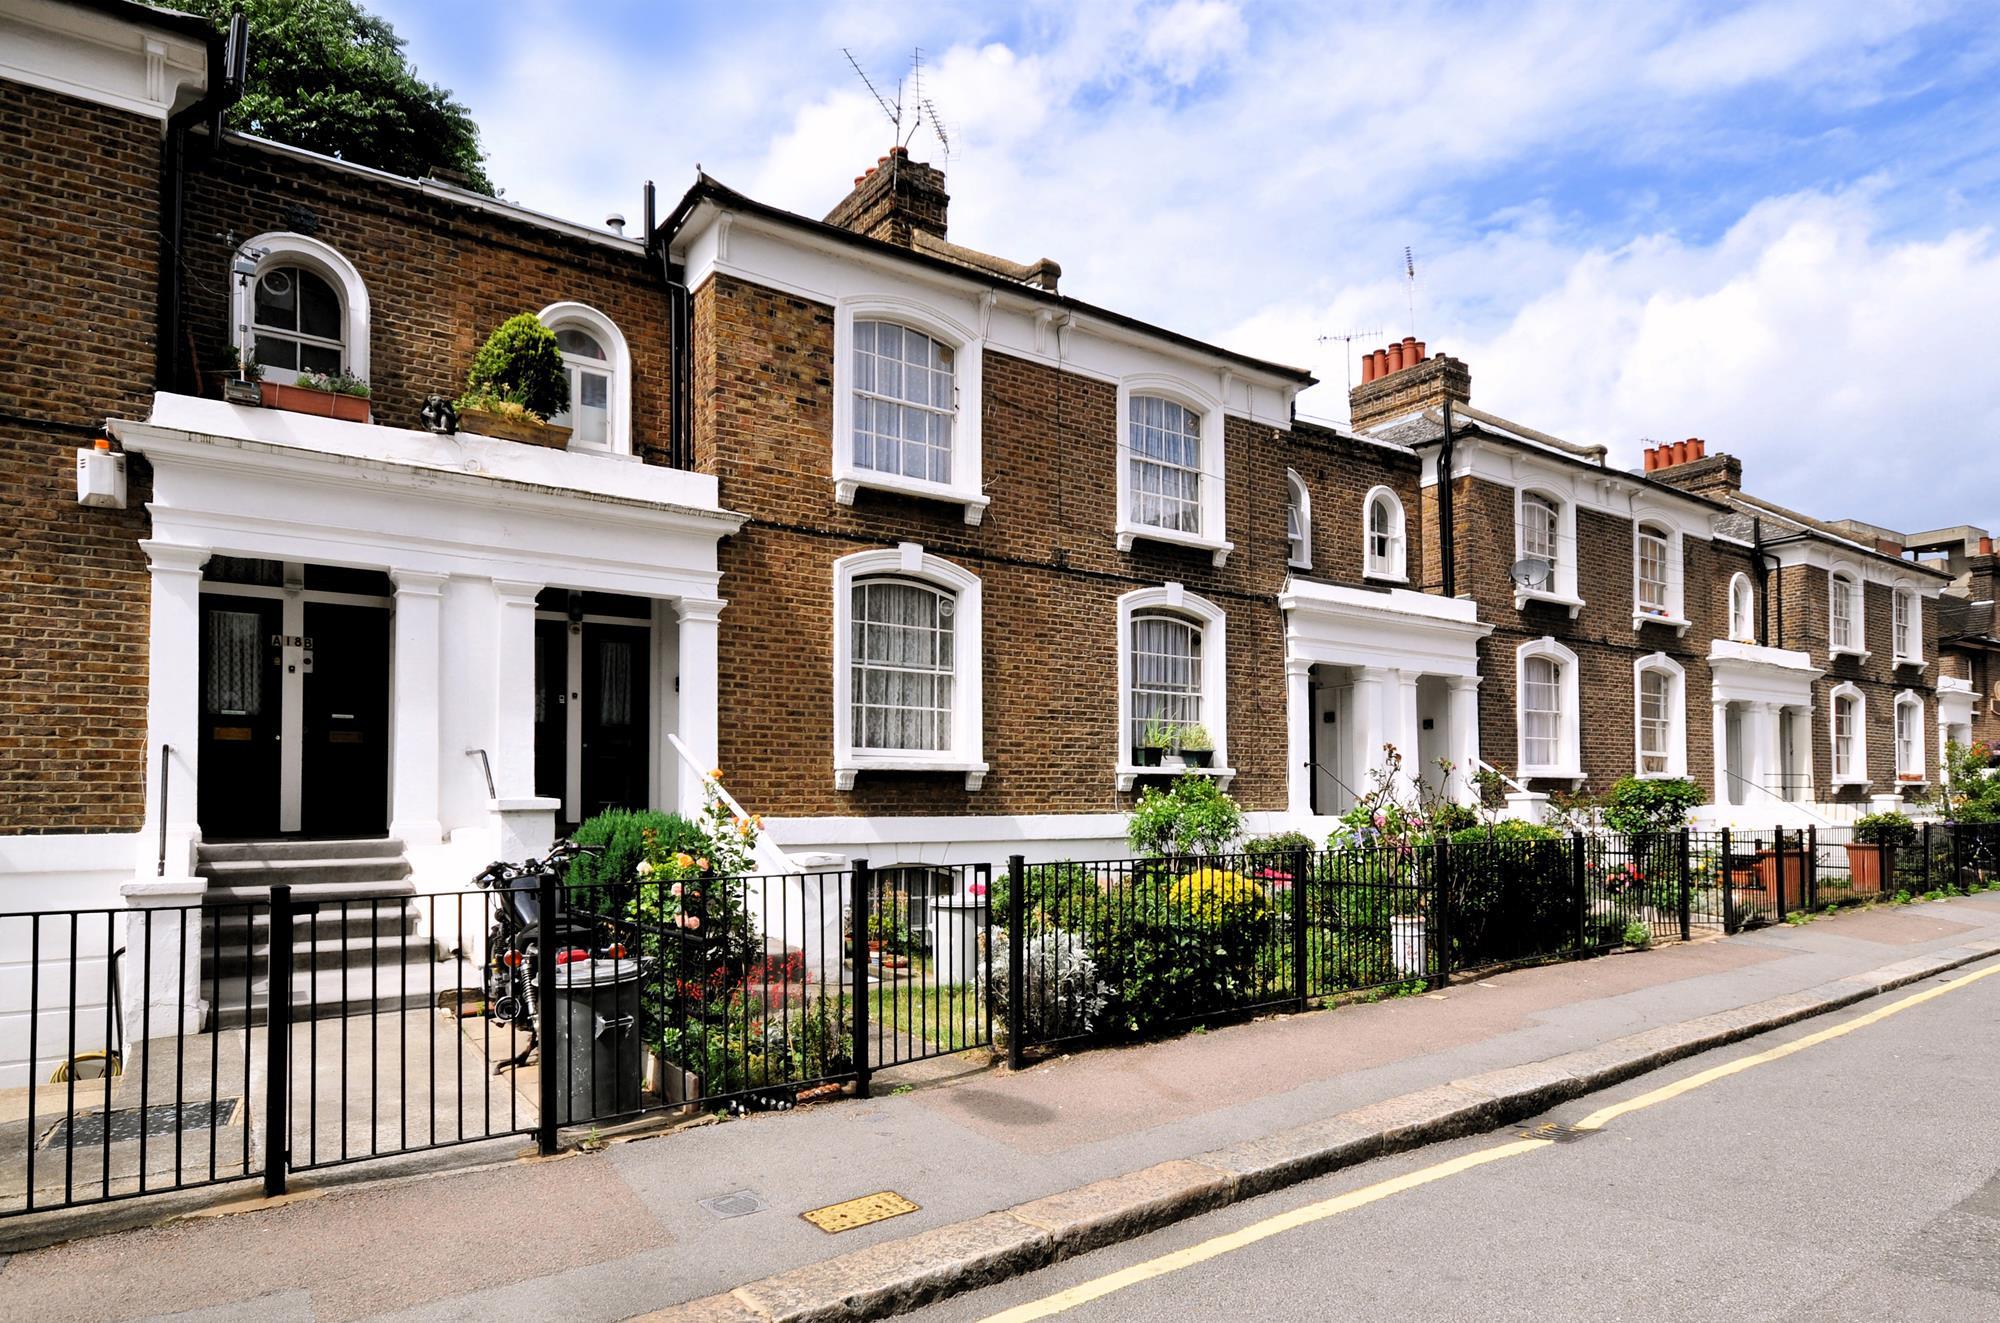 london-house-prices-set-to-fall-next-year-news-housing-today